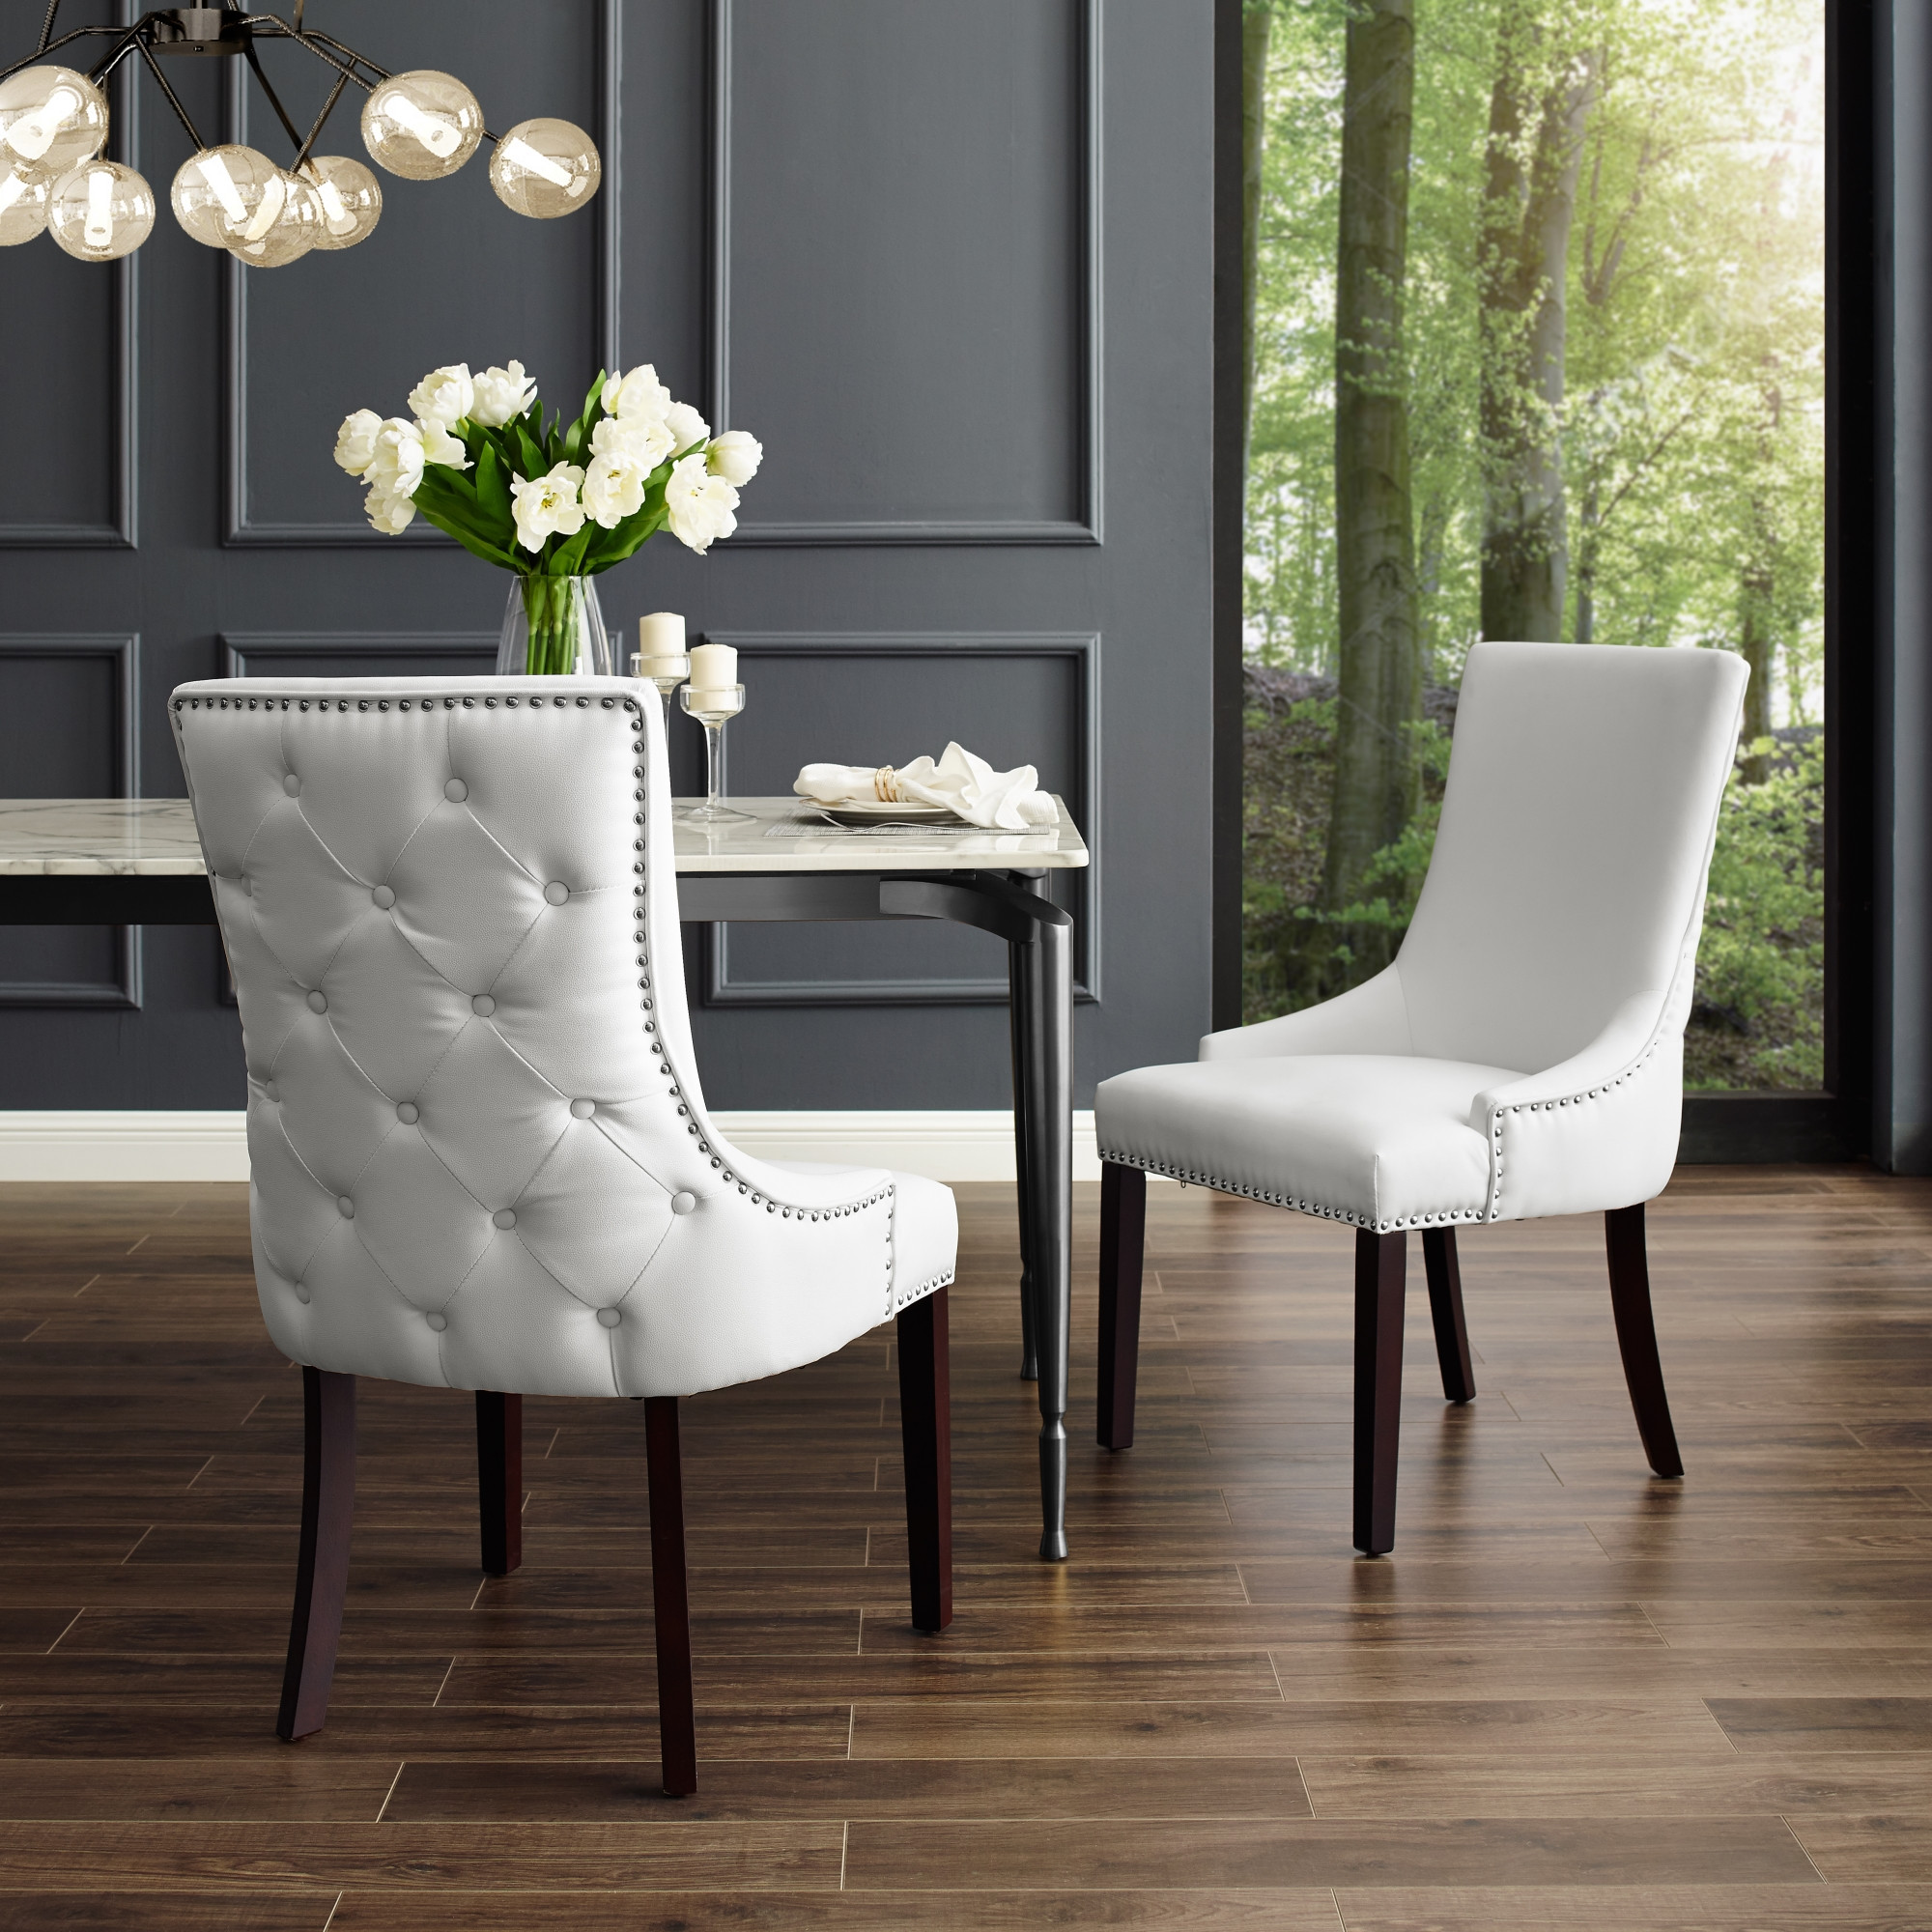 White Leather Kitchen Chairs
 Annabelle White Leather PU Dining Chair Set of 2